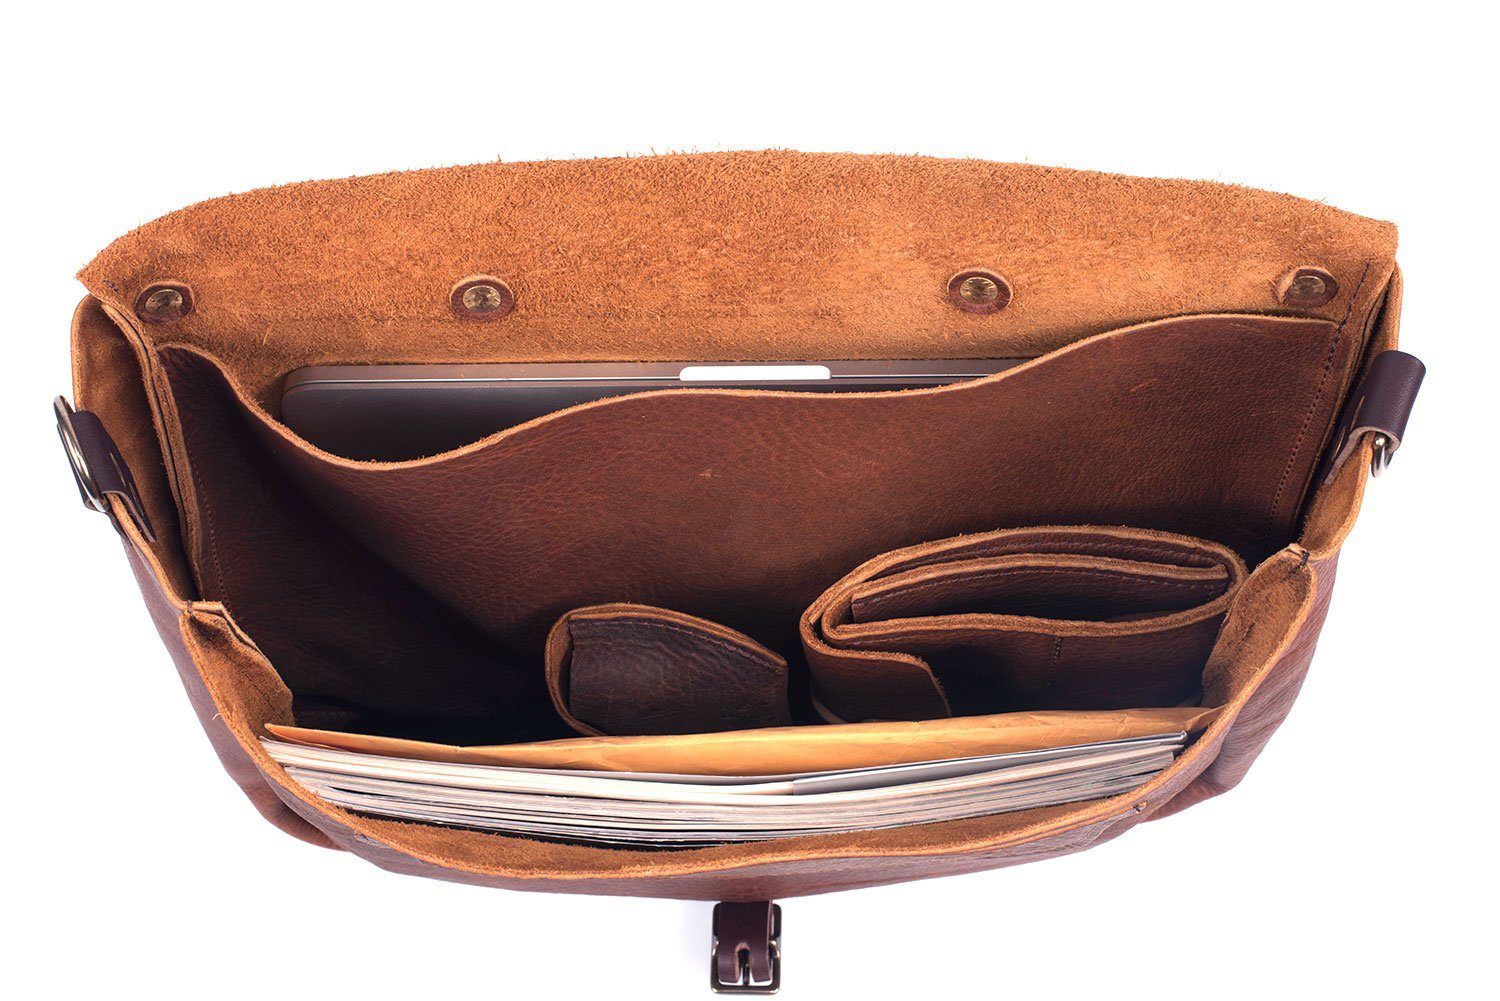 ann kurz | handcrafted leather bags made in Spain